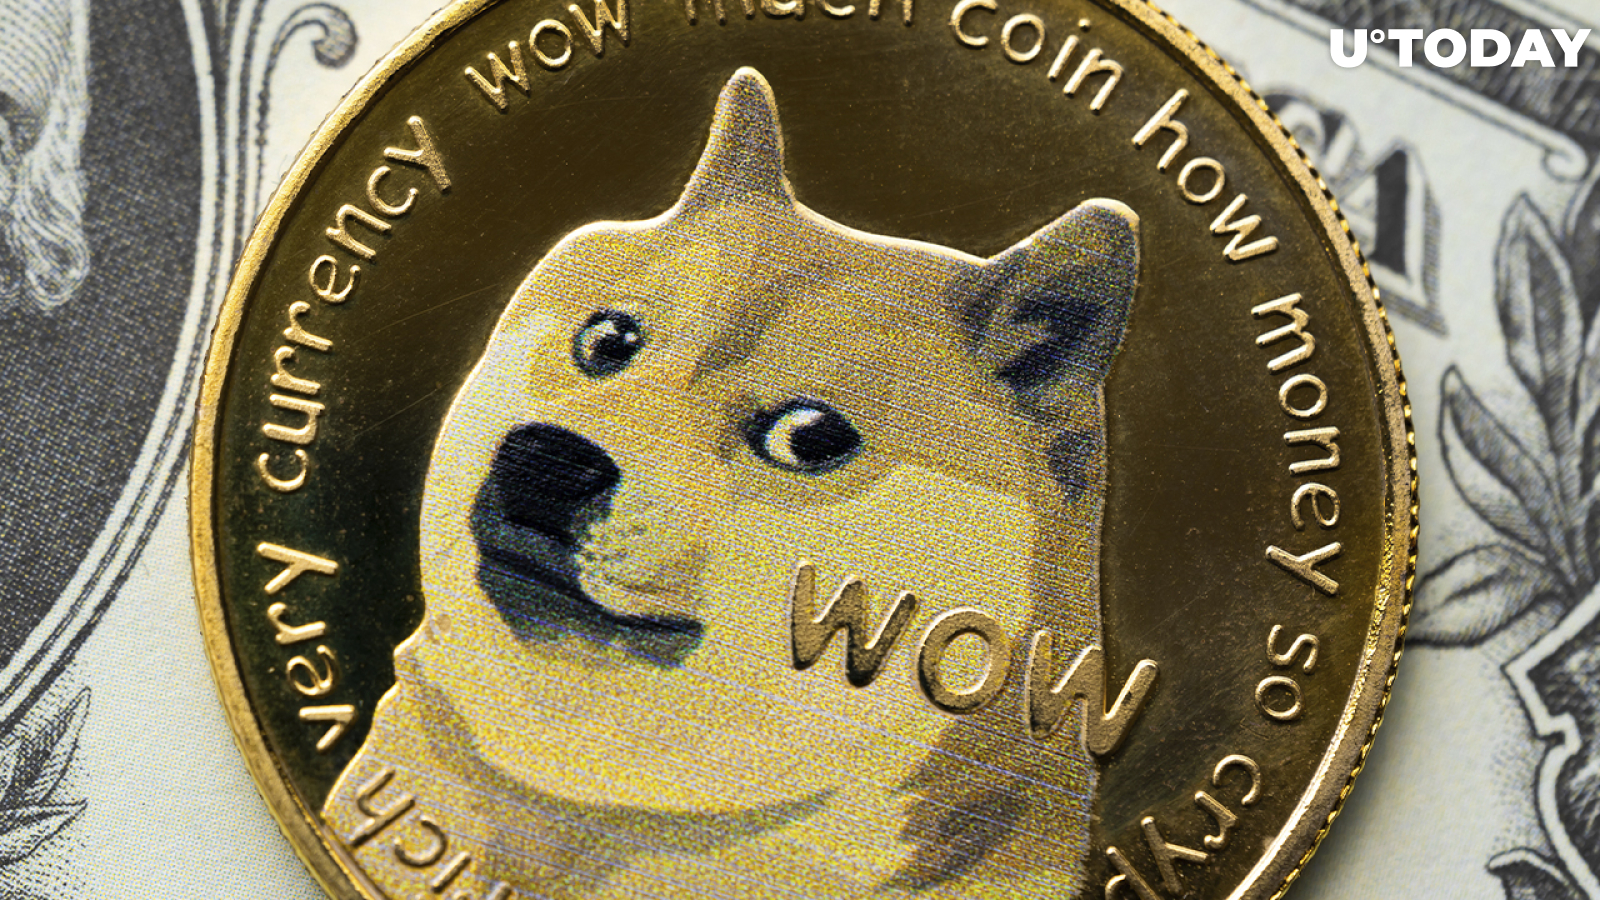 Dogecoin as Legal Tender in California? This Senate Candidate Wants to Make It Happen